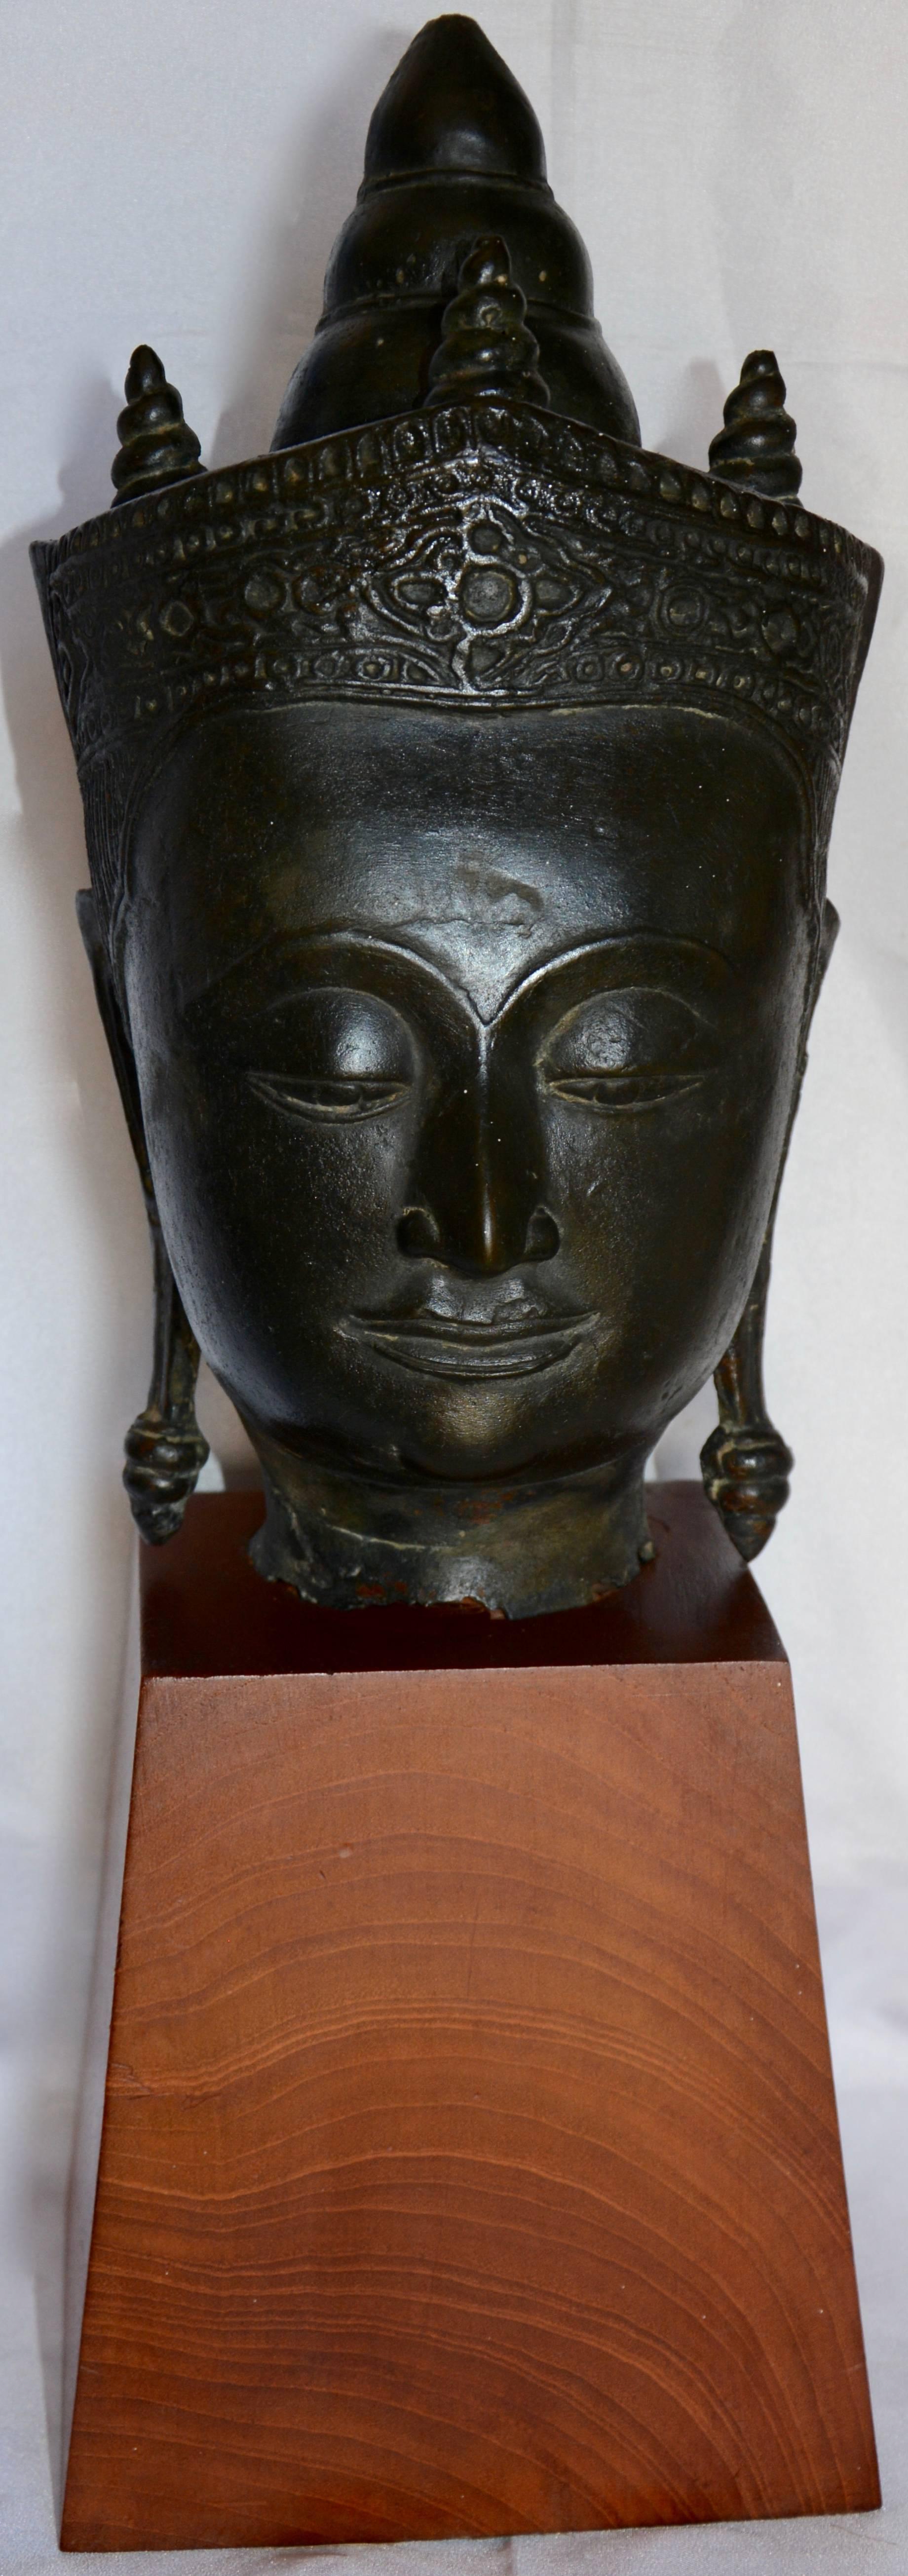 Featured is a fabulous cast bronze Thai Buddha bust statue mounted on a wooden base. It has the features of a traditionally designed Buddha statue, including stylized crown and elongated earlobes. The bronze head is hollow, and the neck fits over a